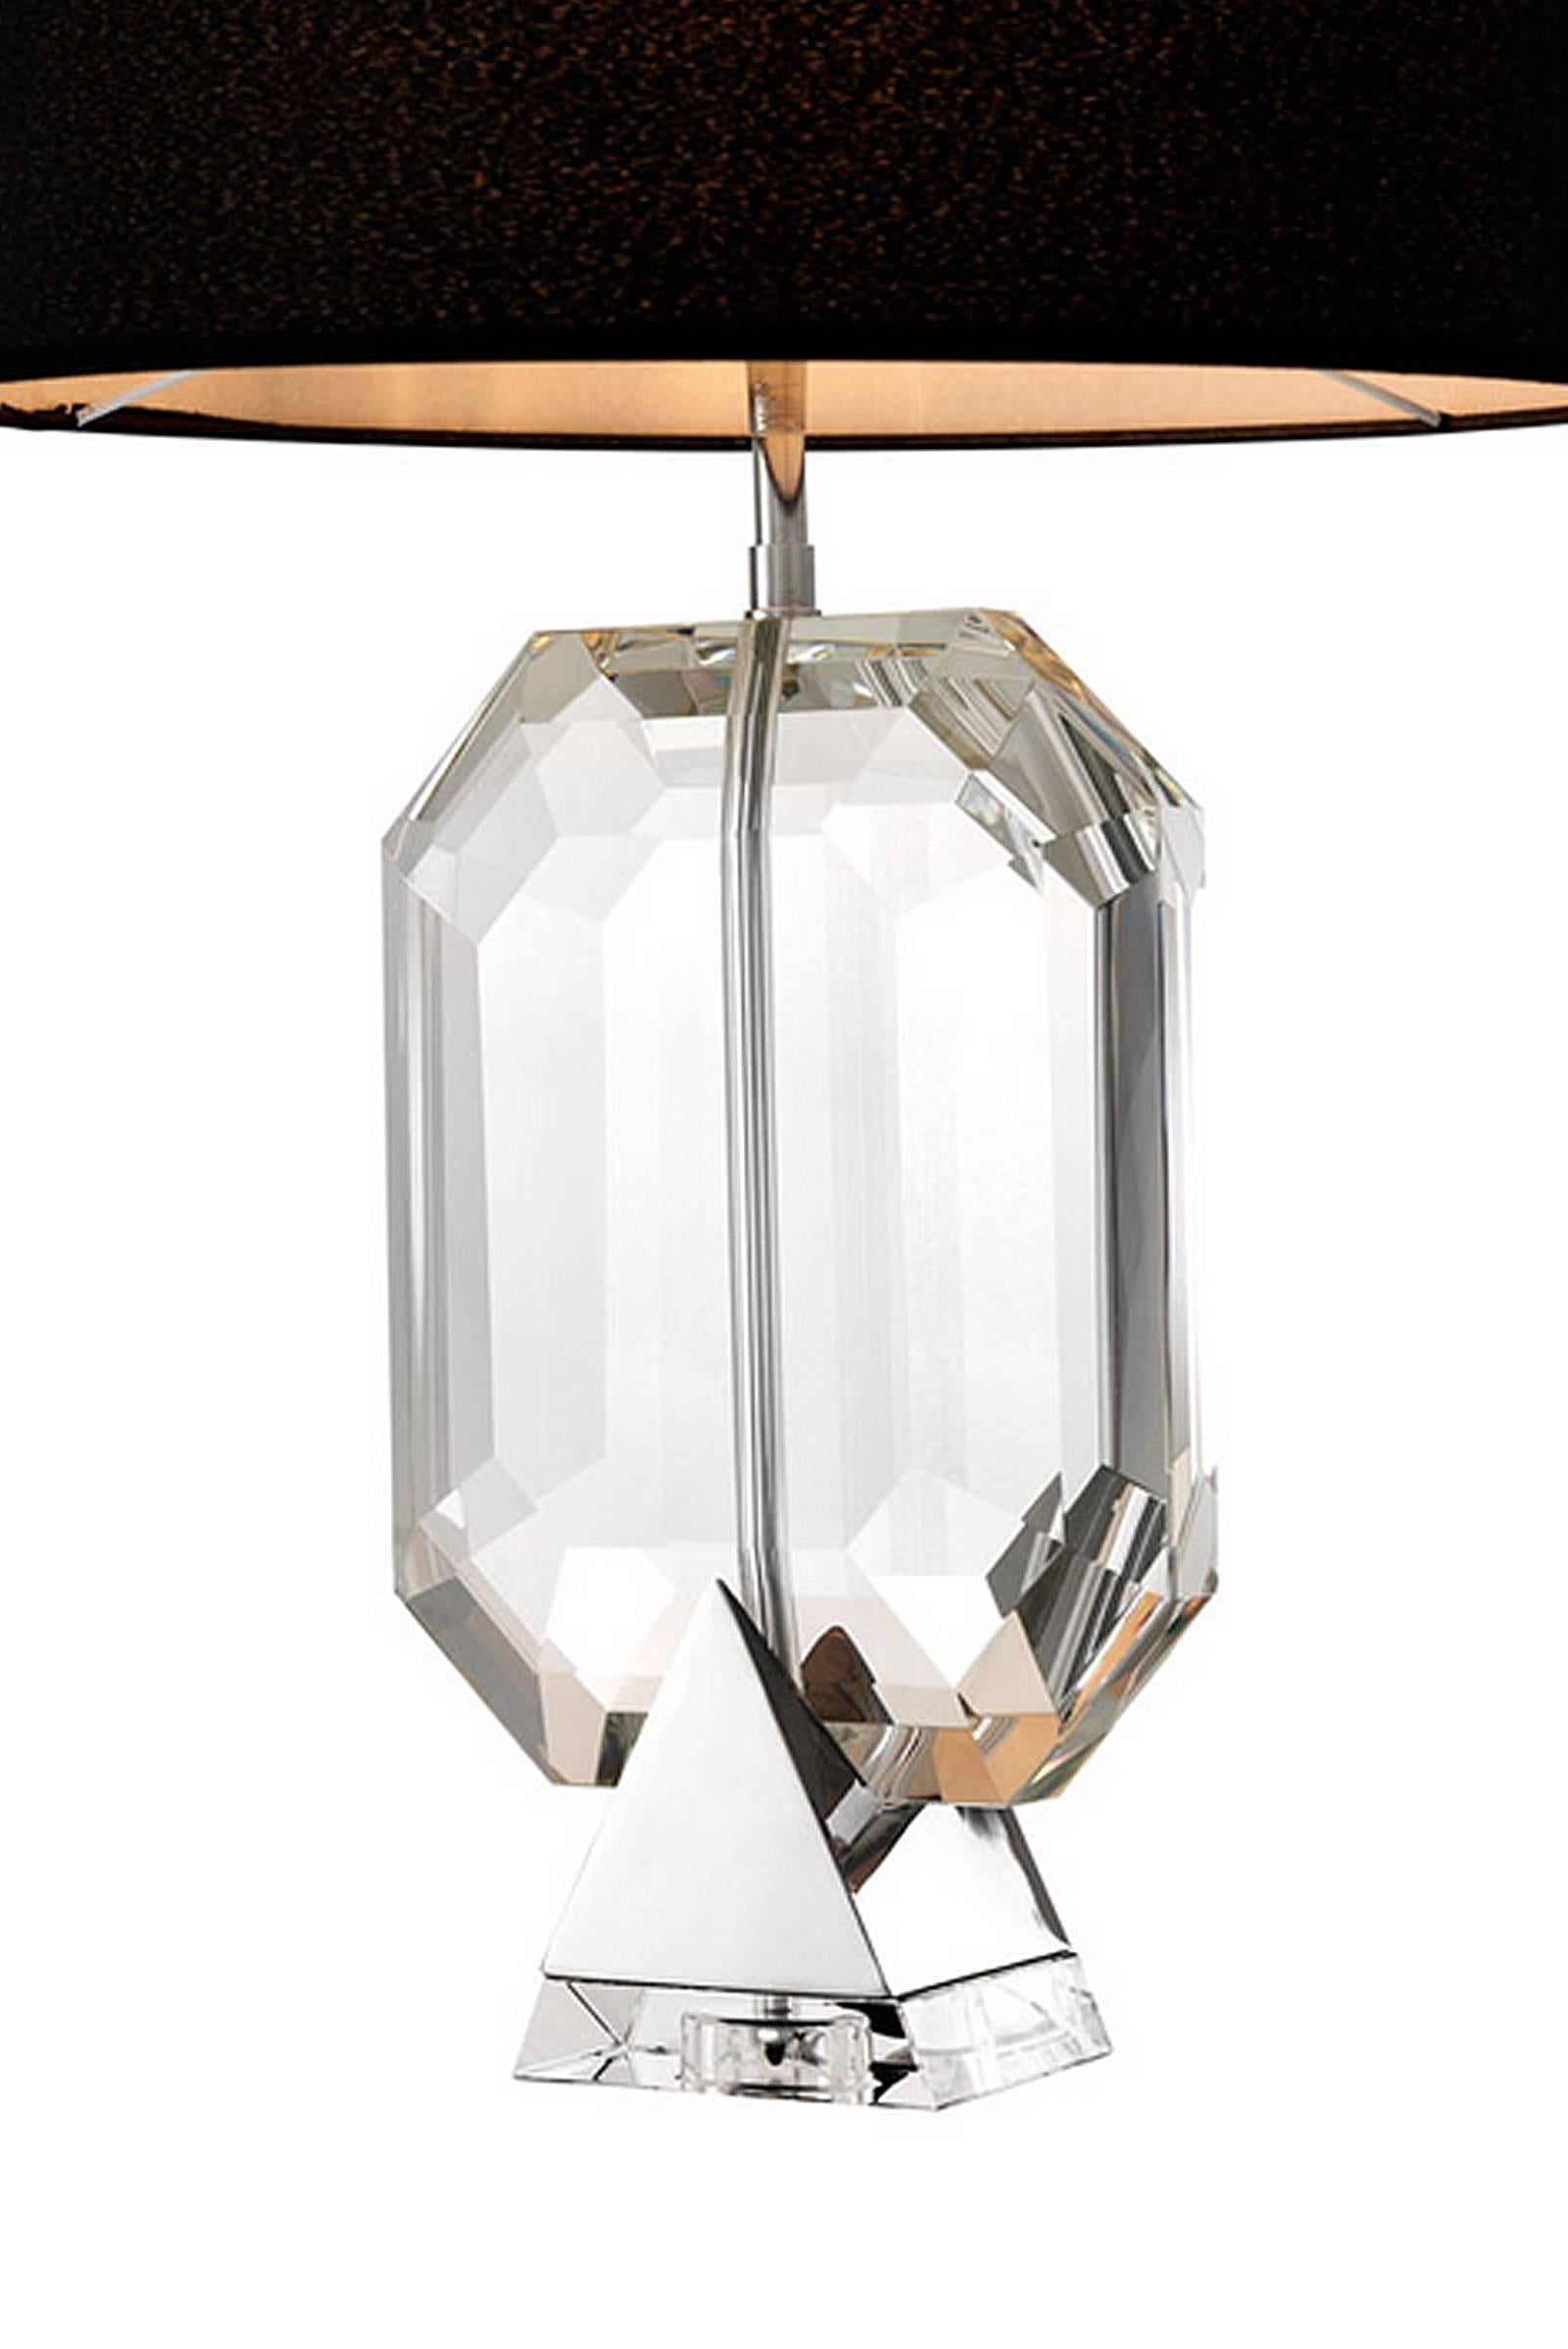 Table lamp in crystal glass and nickel finish.
